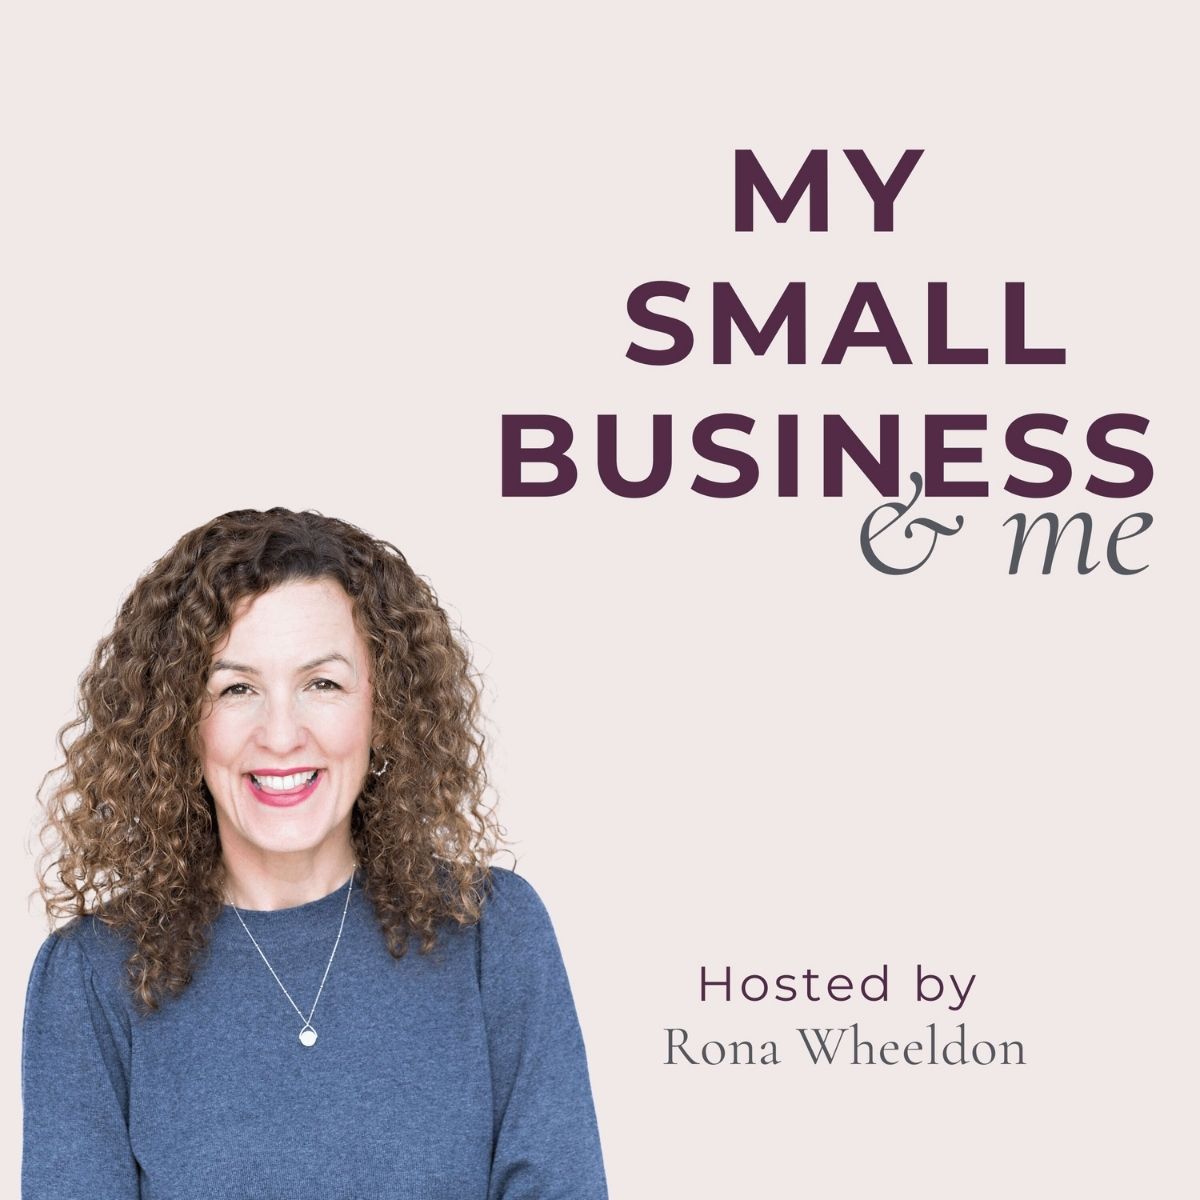 Rona Wheeldon of my small business and me podcast - on thursd